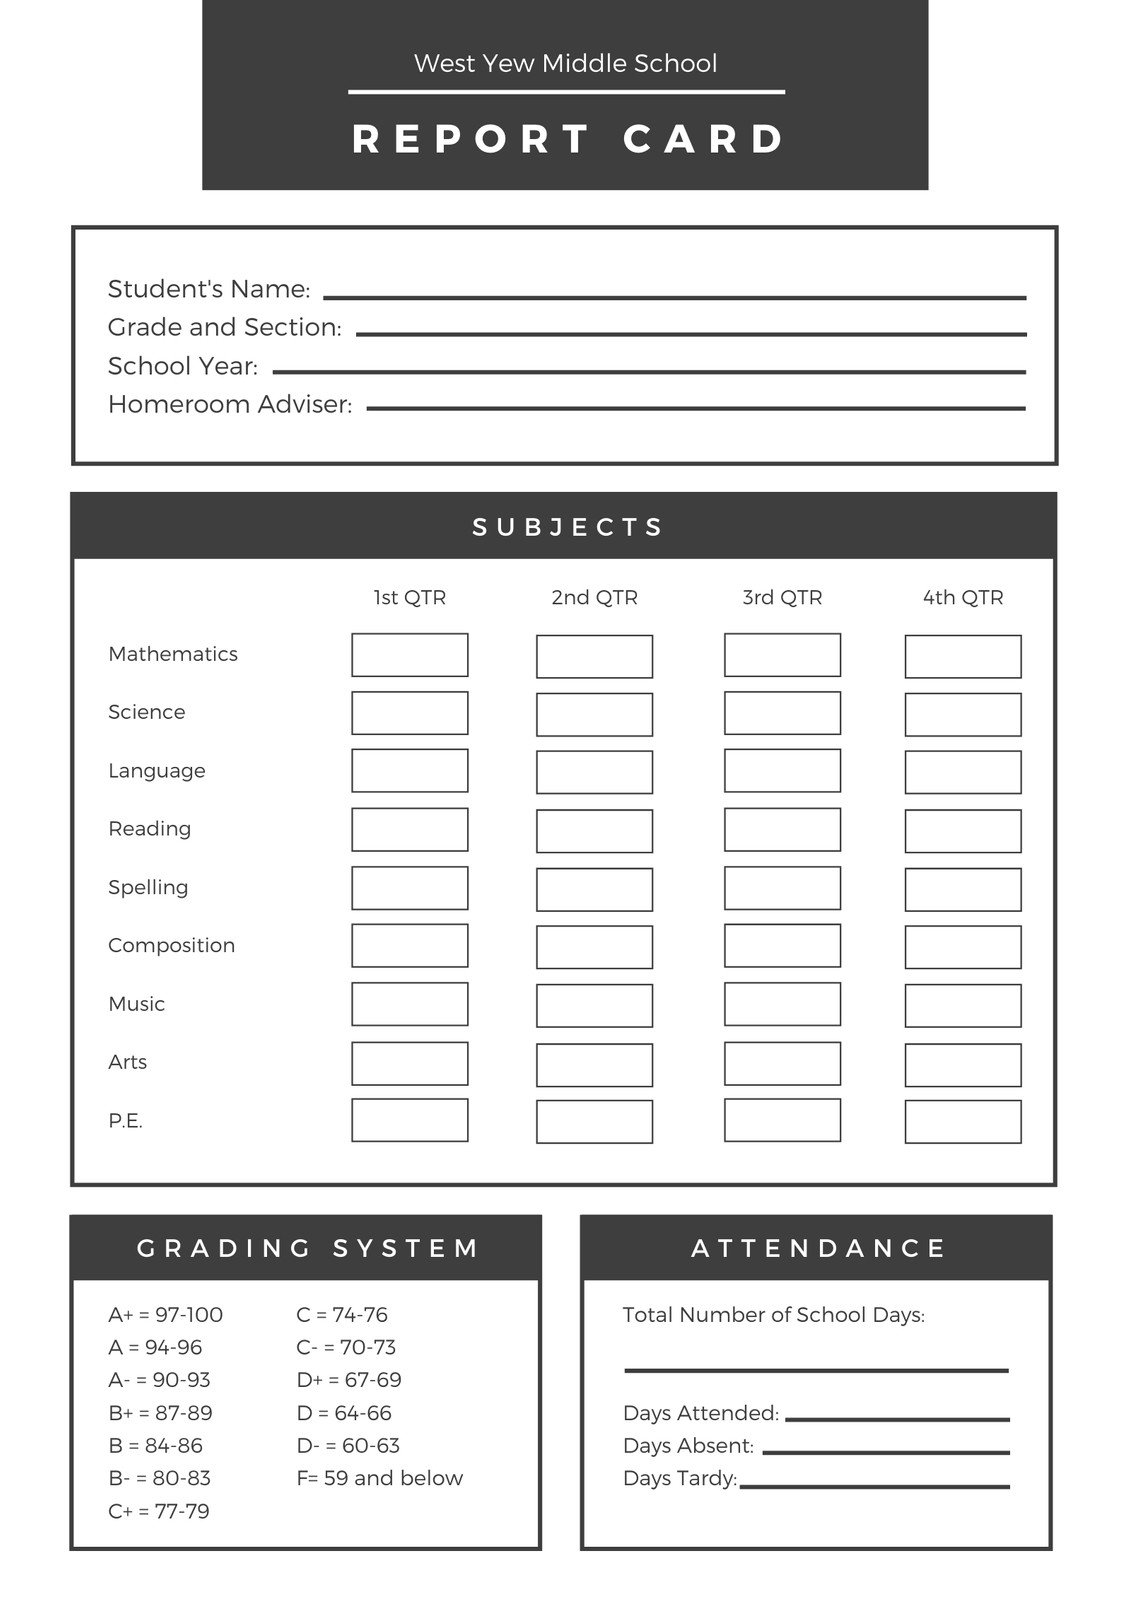 Customize 21+ Middle School Report Cards Templates Online - Canva With Report Card Template Middle School